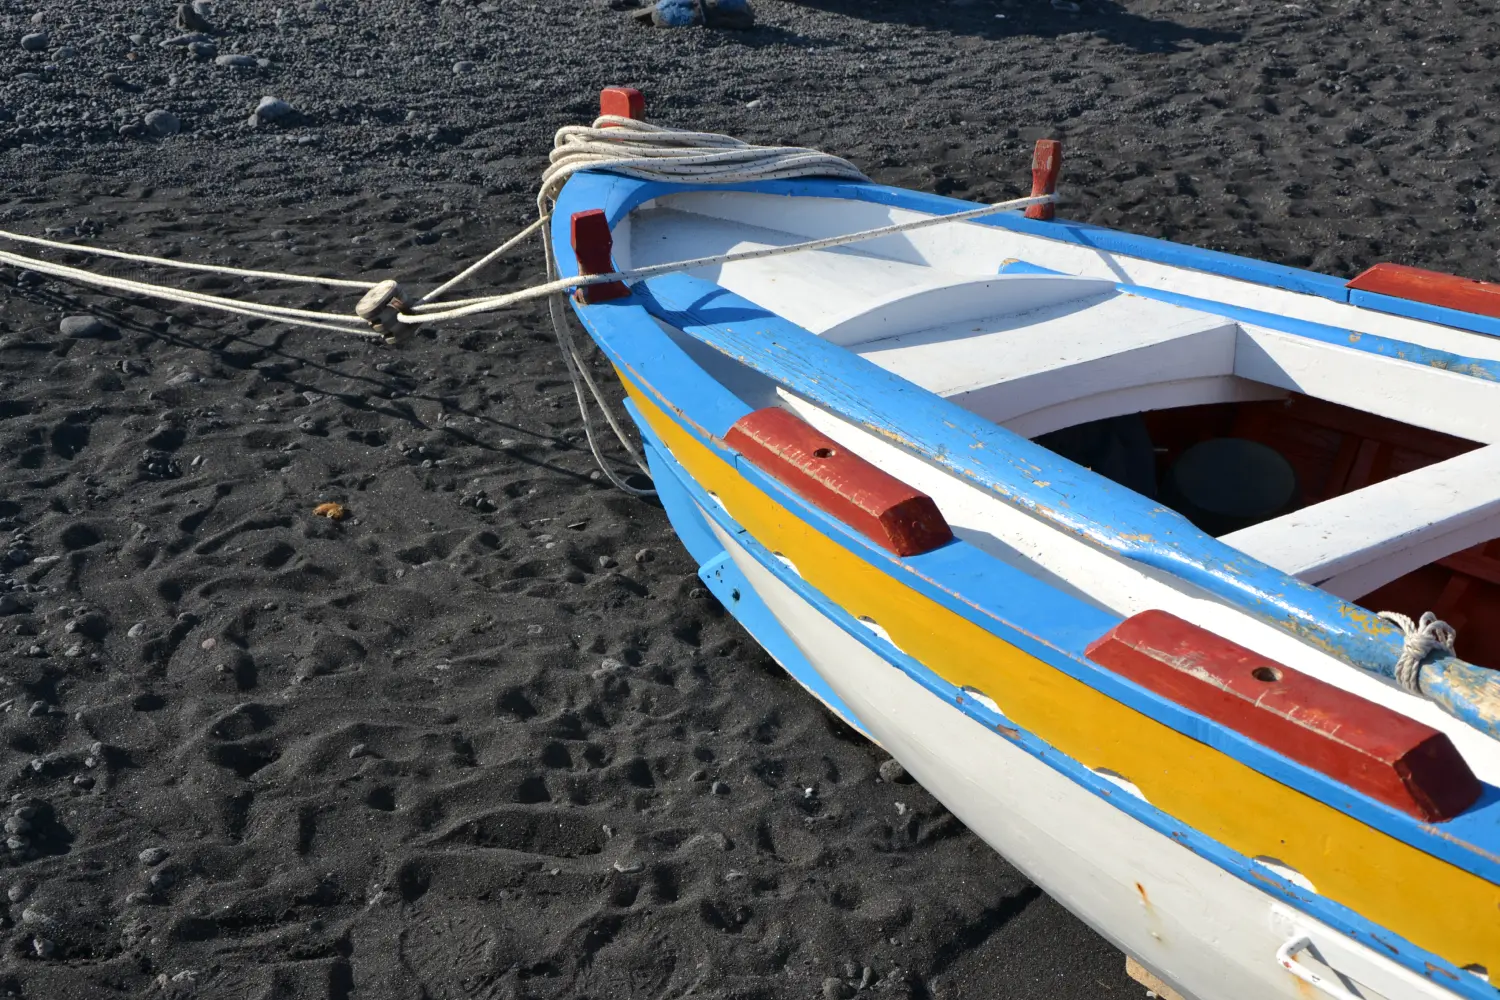 Ferry to Stromboli - A colorful fishing boat on the black beach of Stromboli Island.